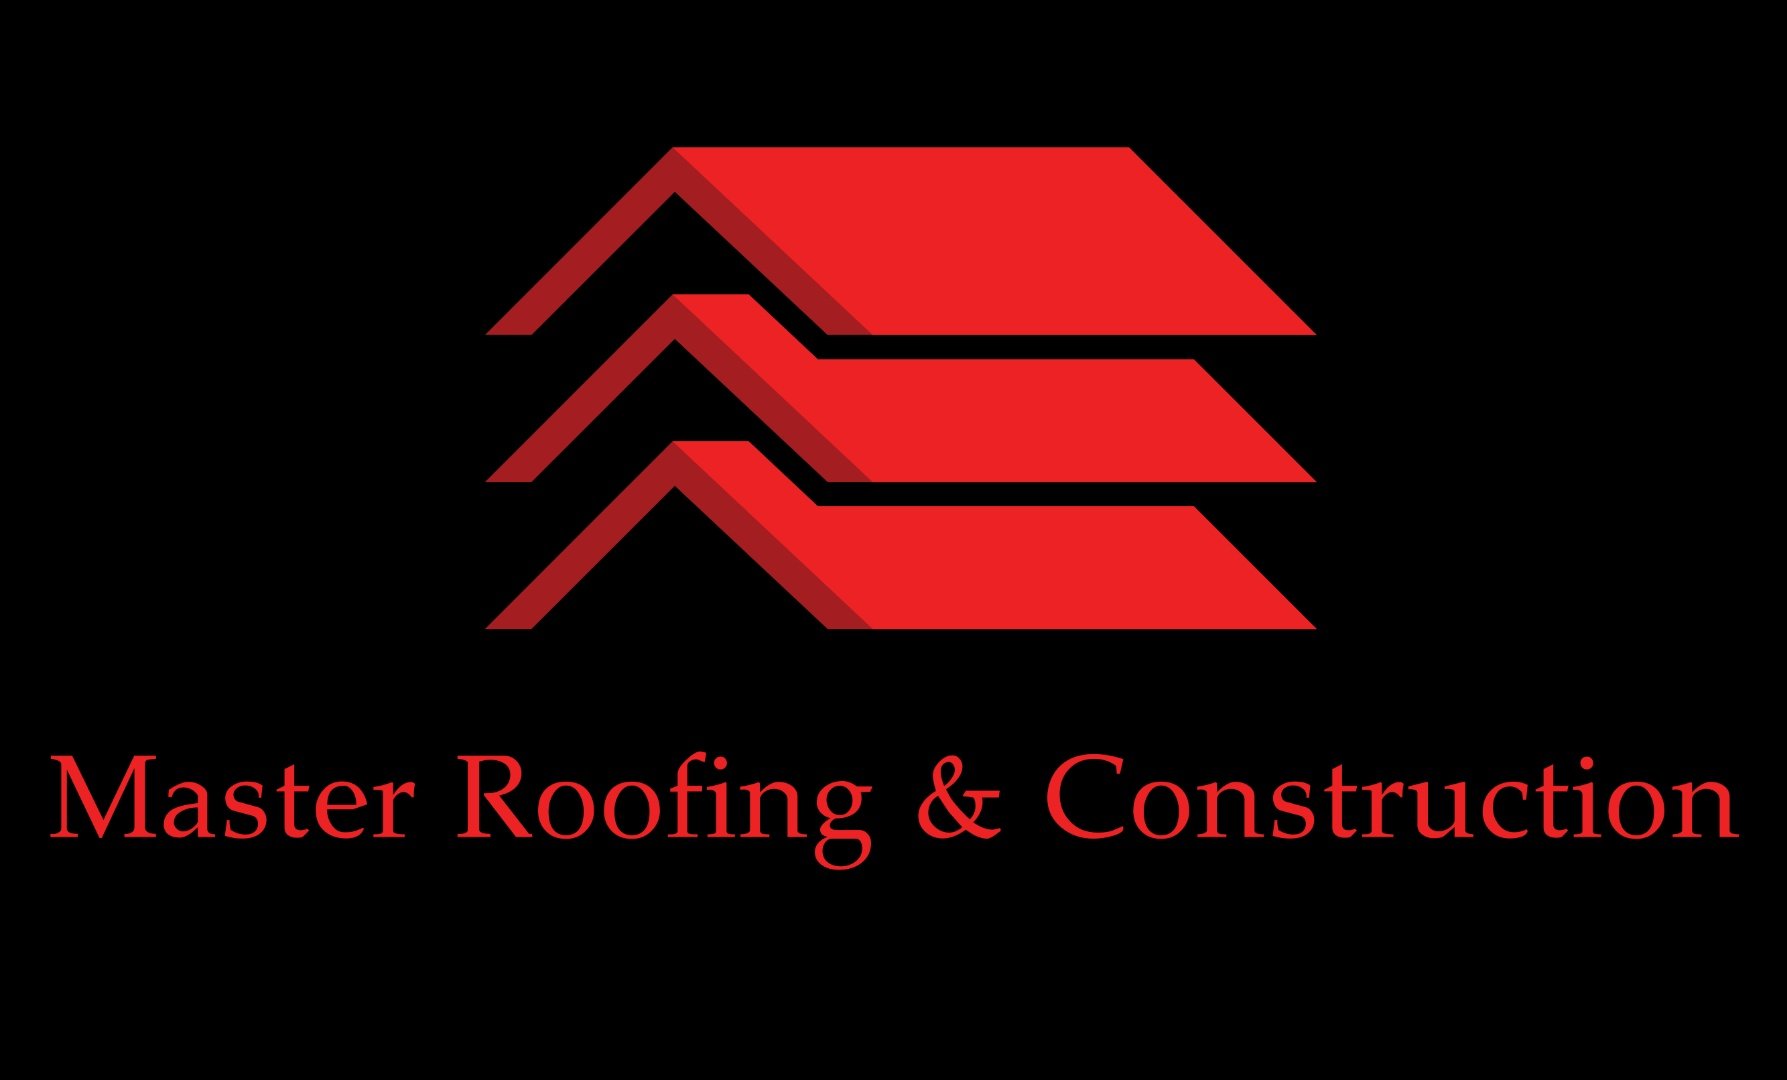 Master Roofing & Construction Logo